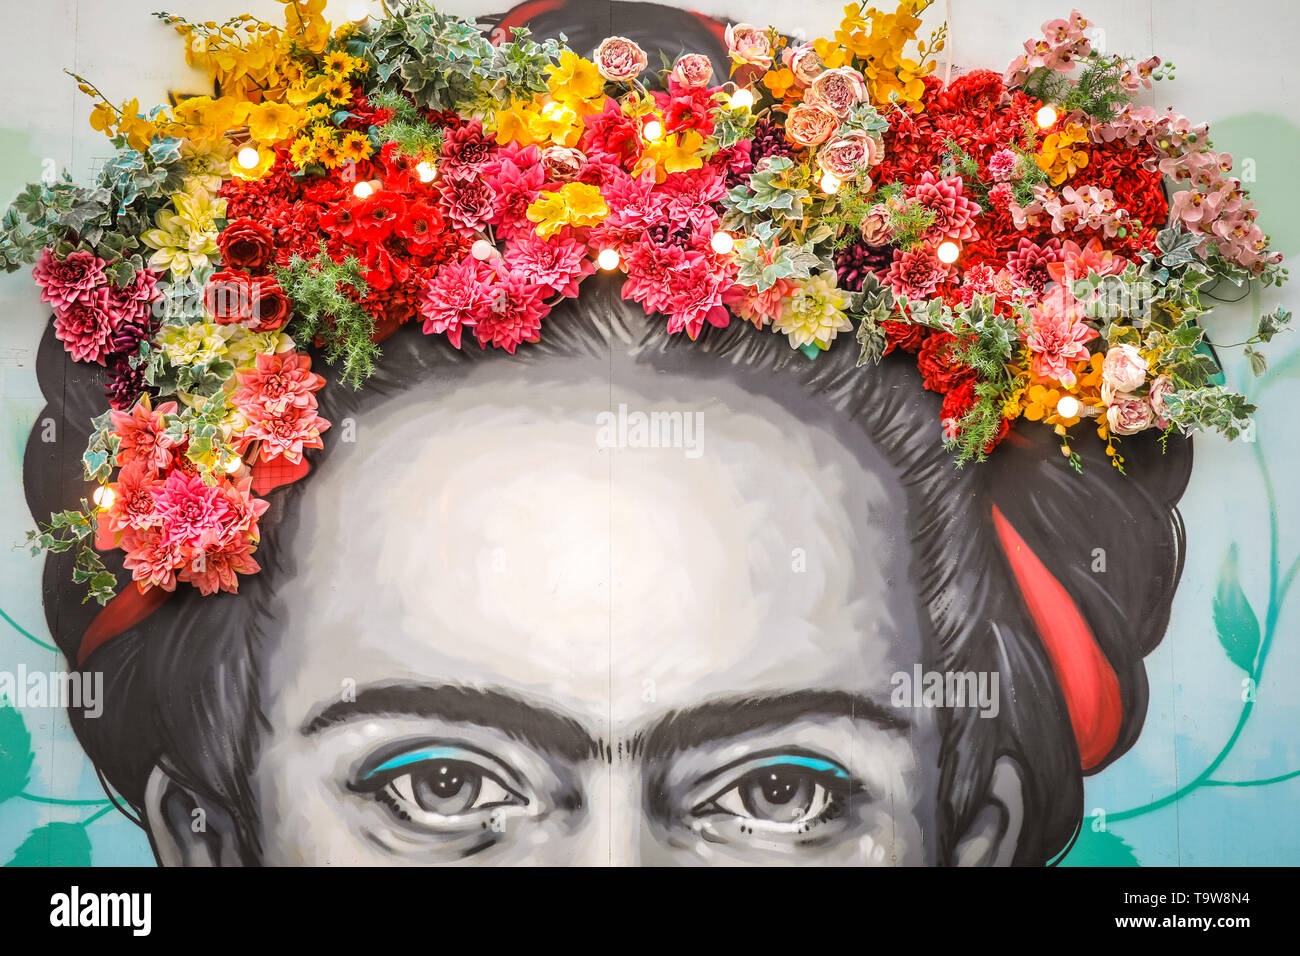 Belgravia, London, UK, 20th May 2019. An existing installation by Moyses Stevens florial artistry, which is again on display with other new floral displays in Eccleston Yards. The work shows a floral crown above a painting of Frida Kahlo by artist Zabou, called 'Frida with Flowers' (in situ since 2018).  Belgravia's fourth annual floral festival coincides with the RHS Chelsea Flower Show in neighbouring Chelsea. Credit: Imageplotter/Alamy Live News Stock Photo